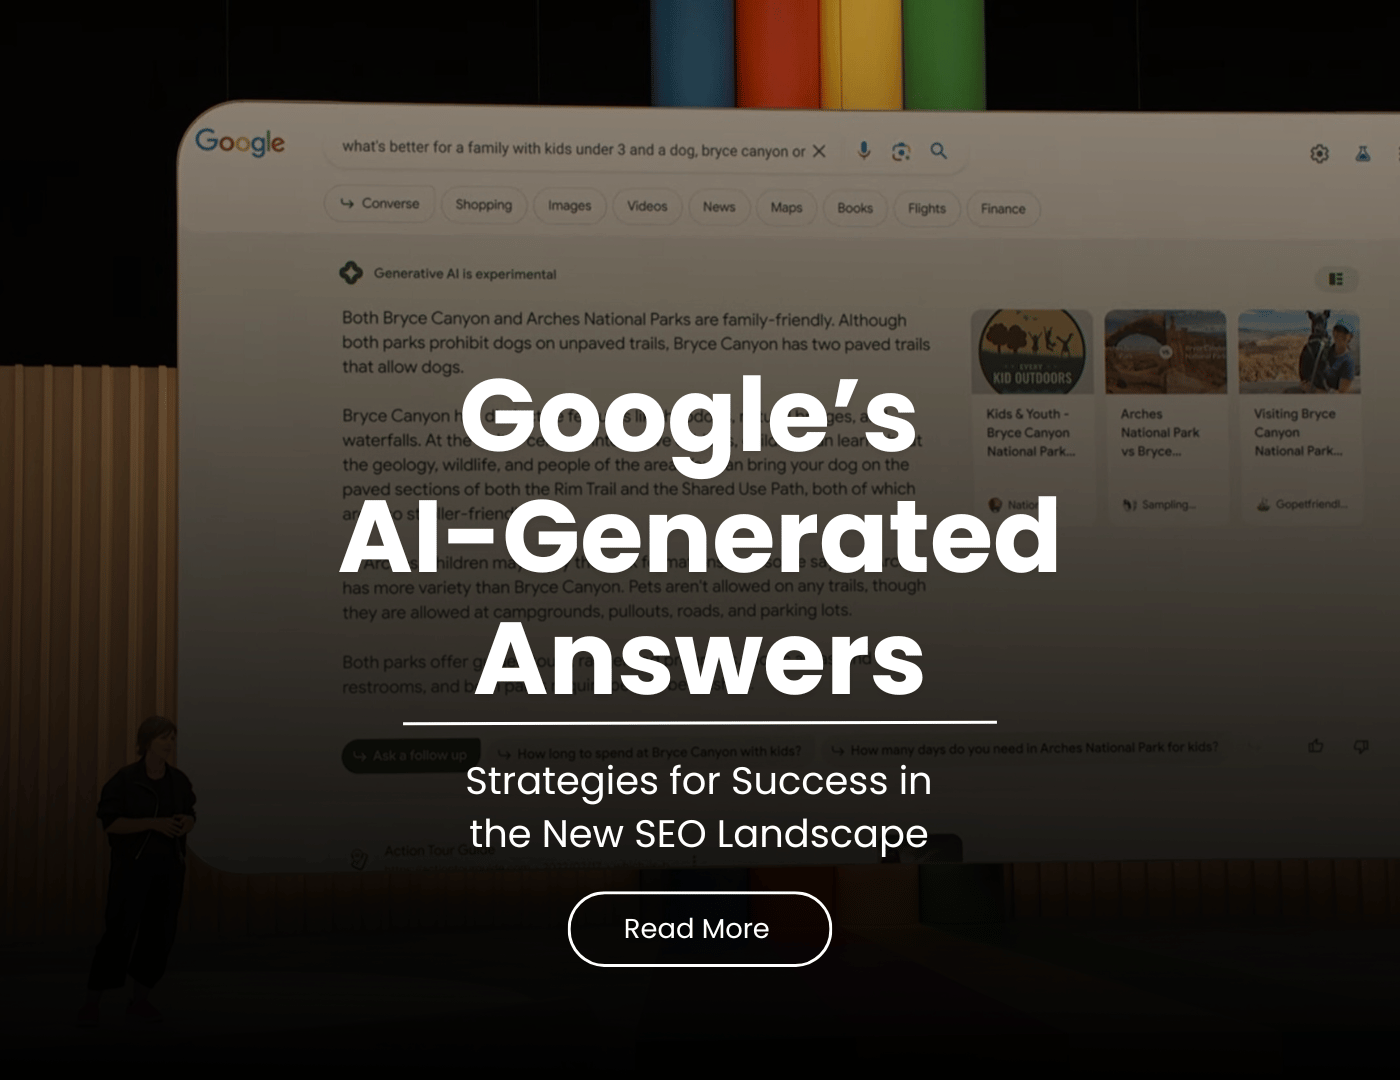 Google's AI-generated Answers